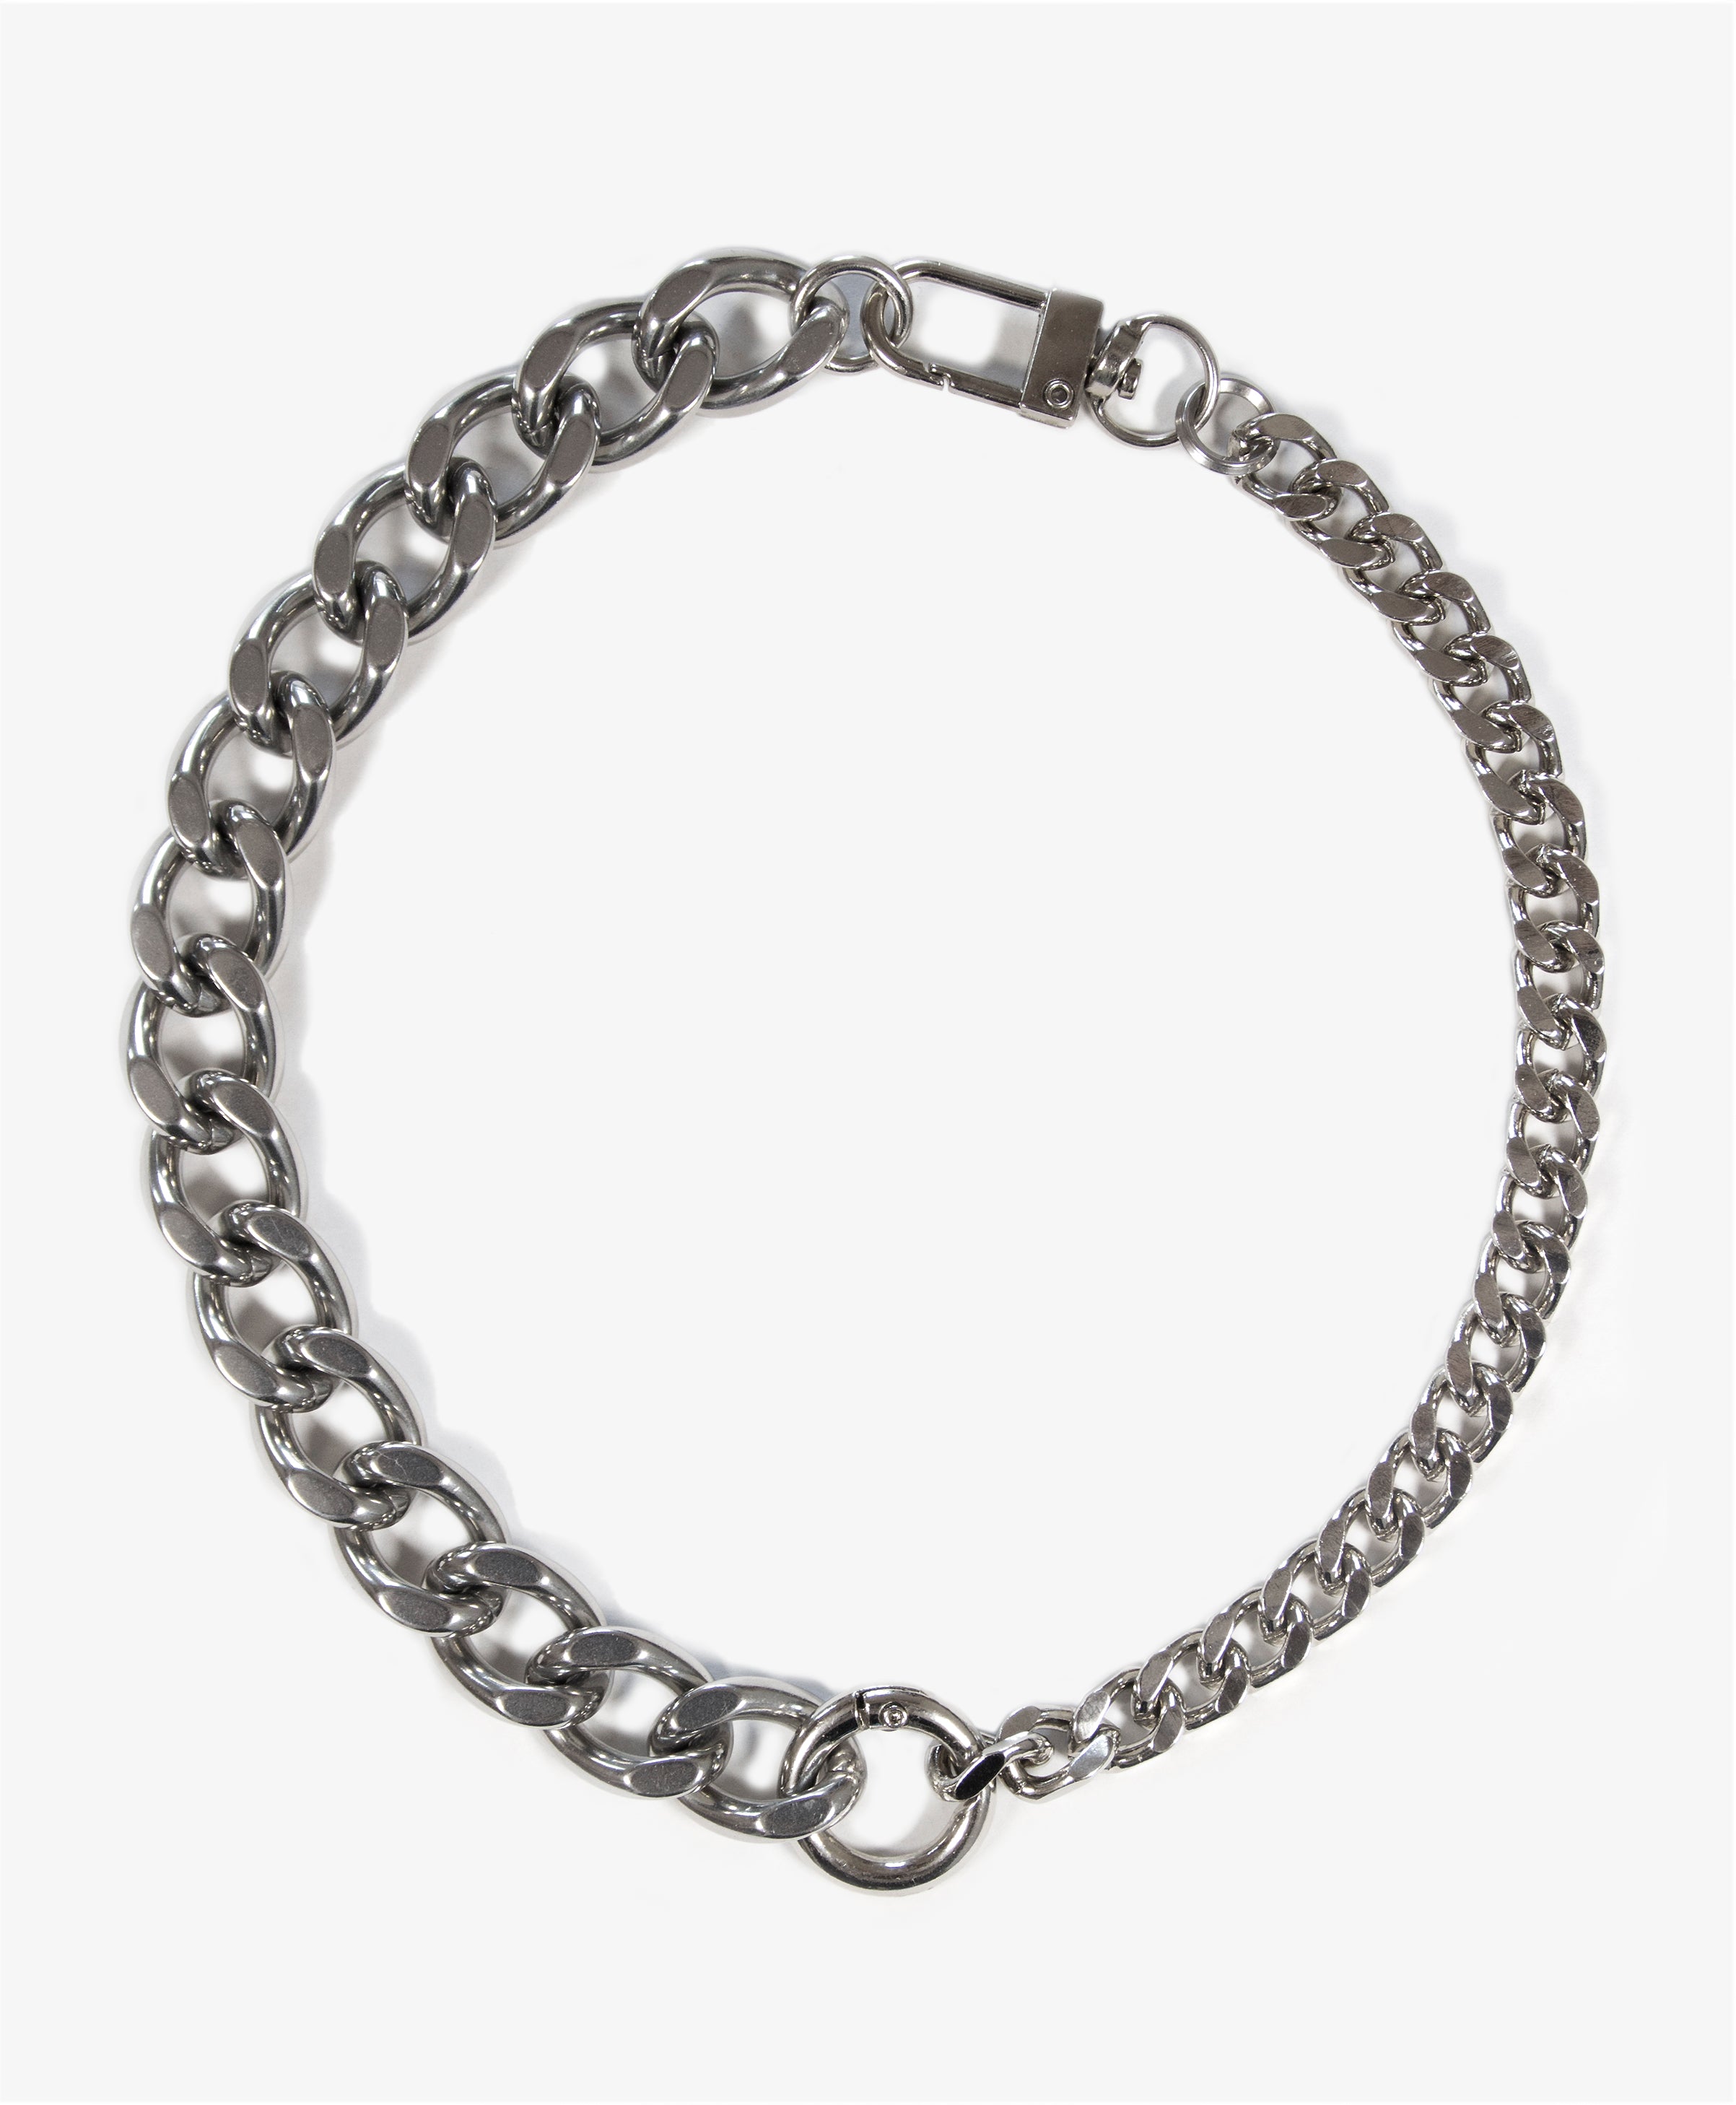 llayers-mens-women-jewelry-silver-stainlesssteel-choker-chain-necklace-unchained-010-Brooklyn-New-York-F2